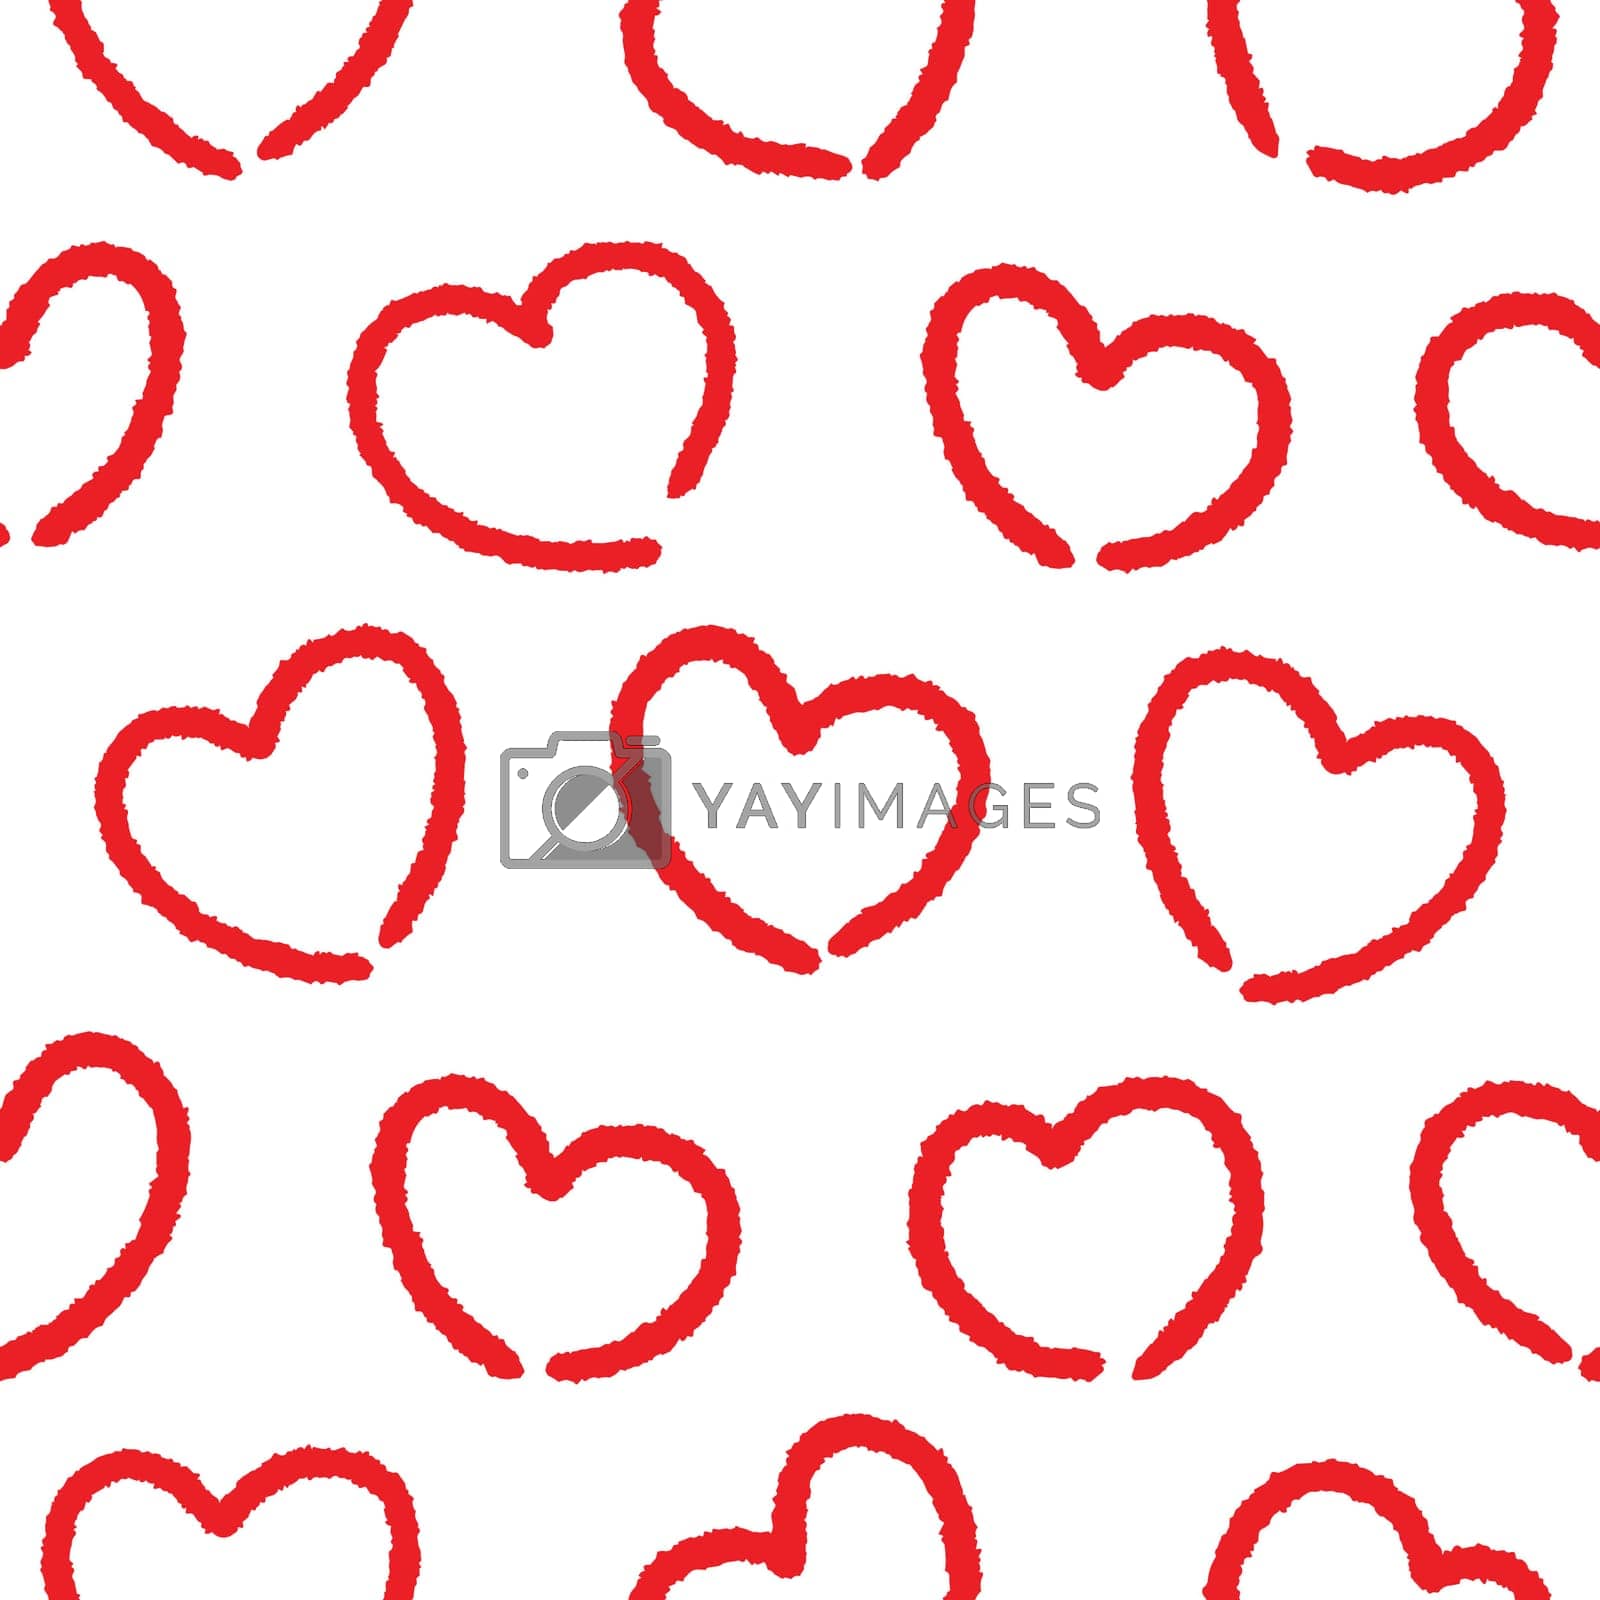 Royalty free image of Textured hearts seamless pattern design by elinnet